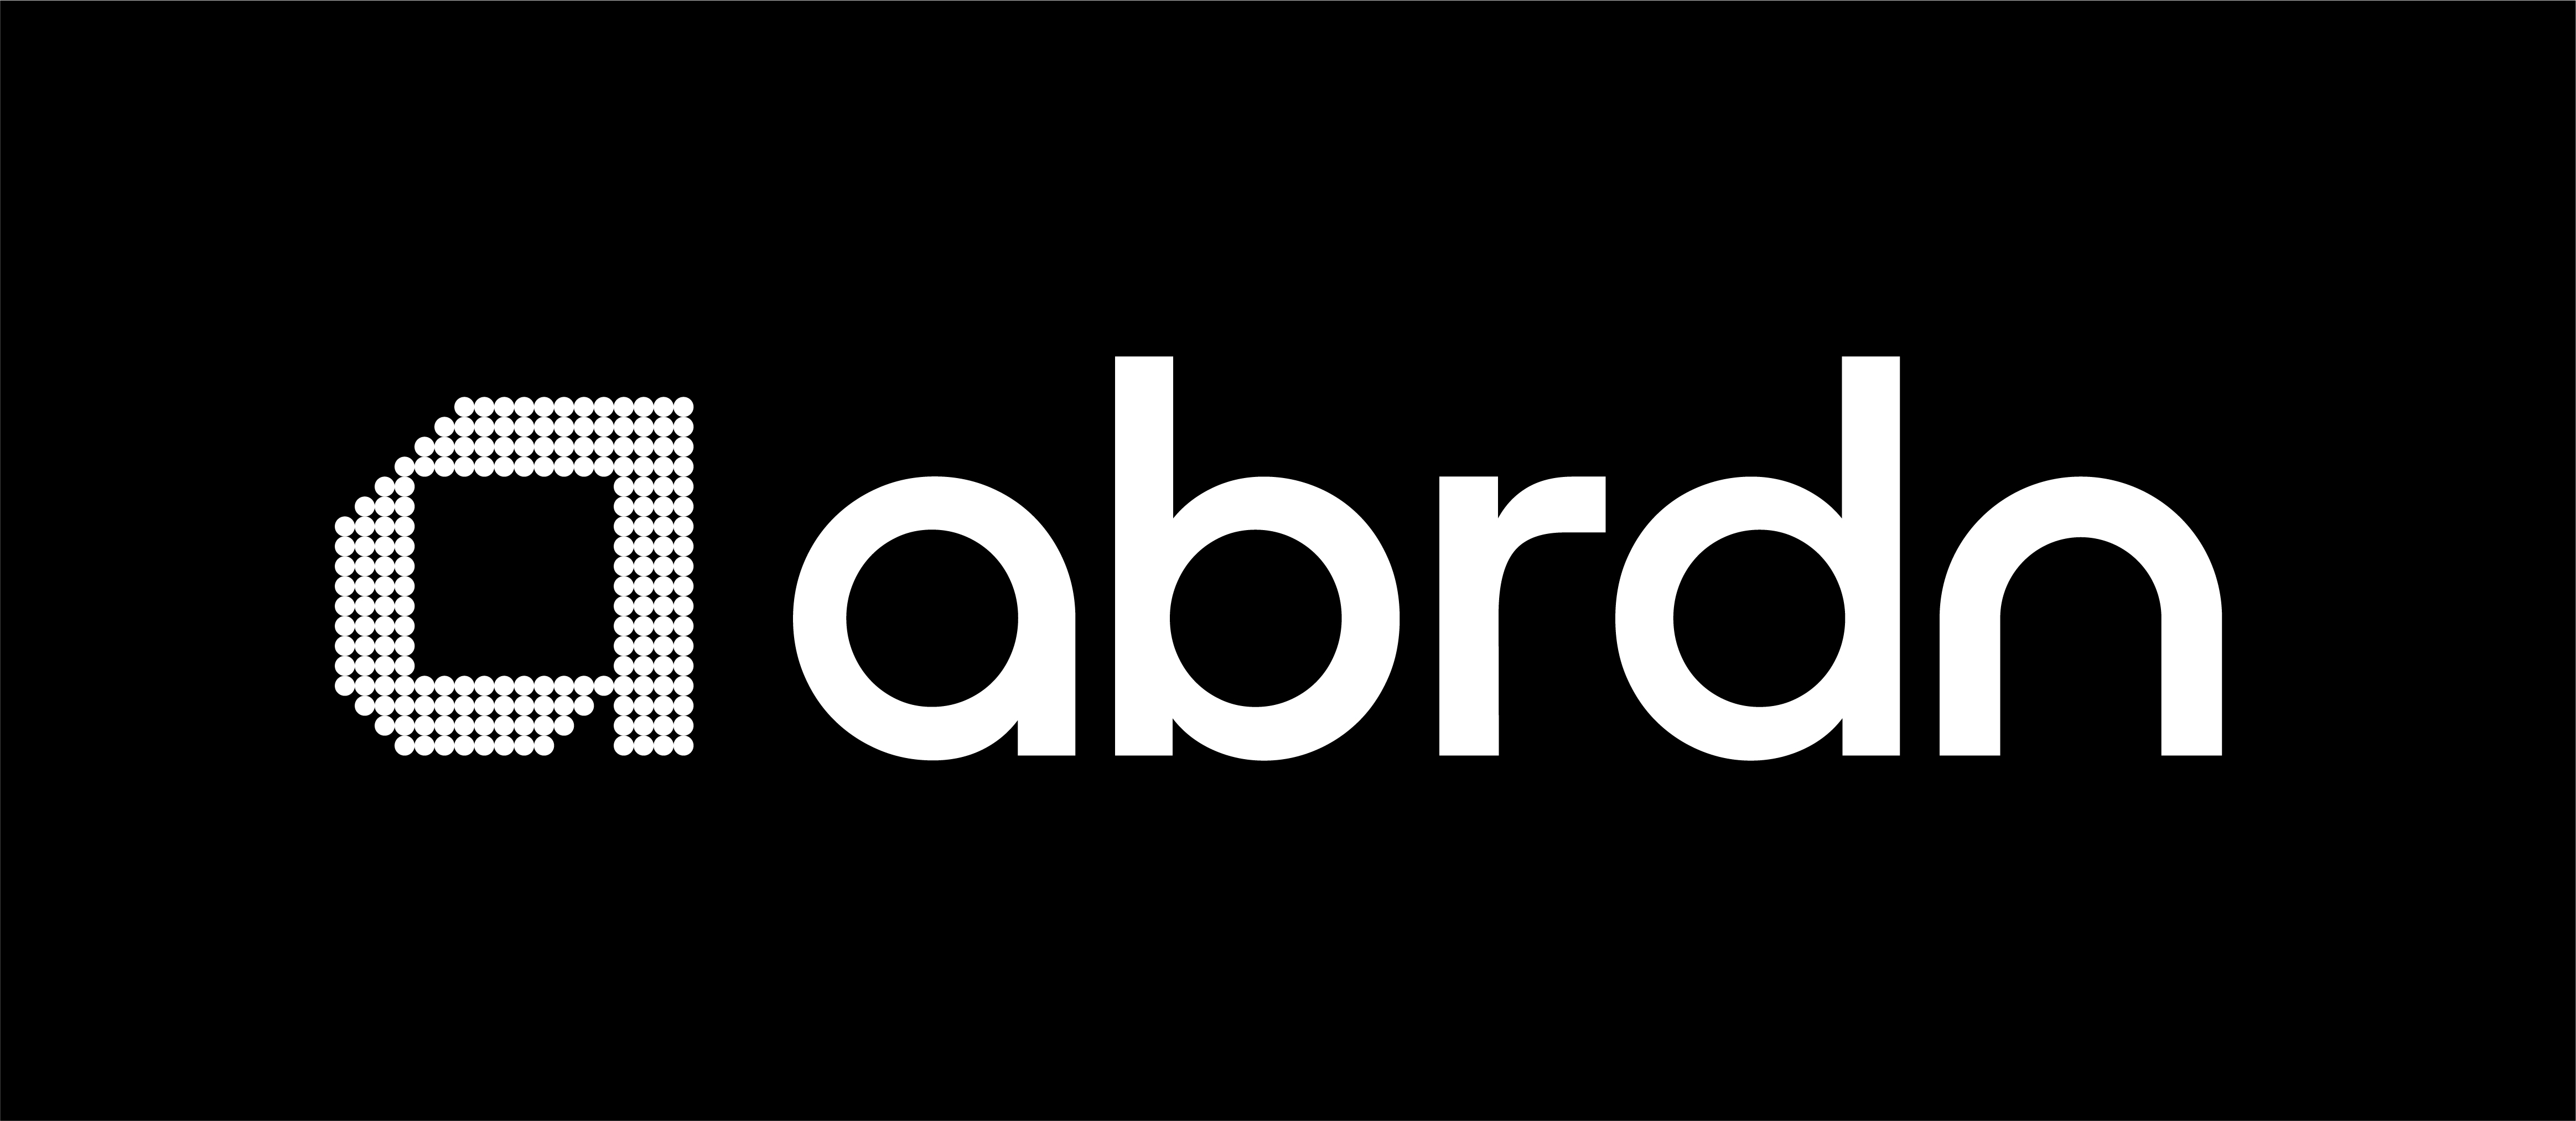 Aberdeen Corporate Services Limited logo